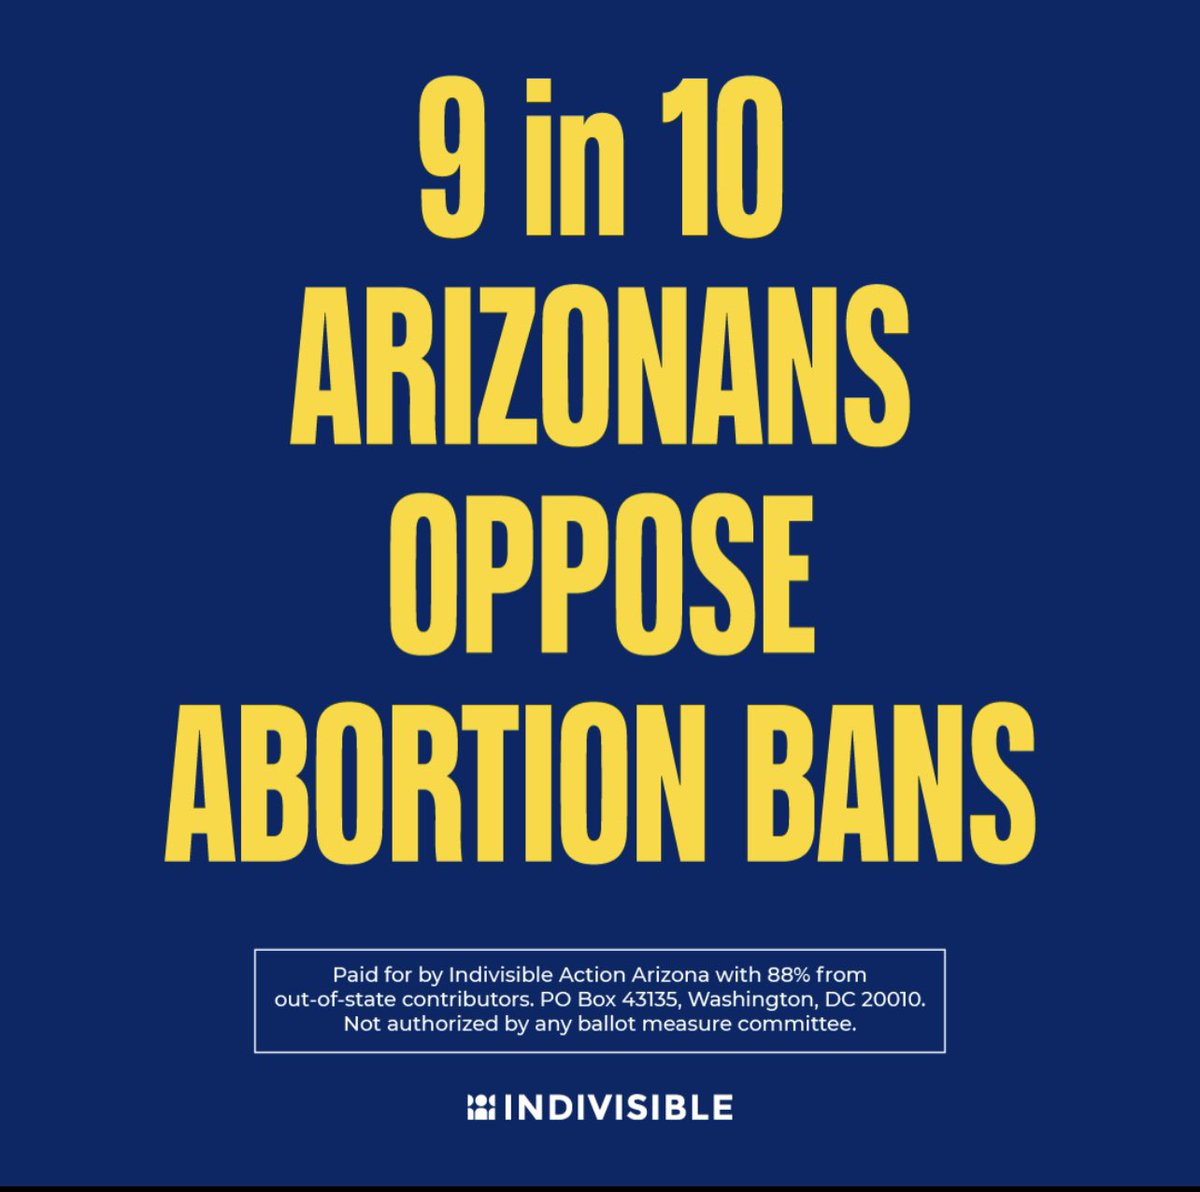 #AbortionIsHealthcare 
#NoBansOnStolenLands
Sign the petition to get abortion protection on the ballot this Nov in Arizona and #RoeYourVote